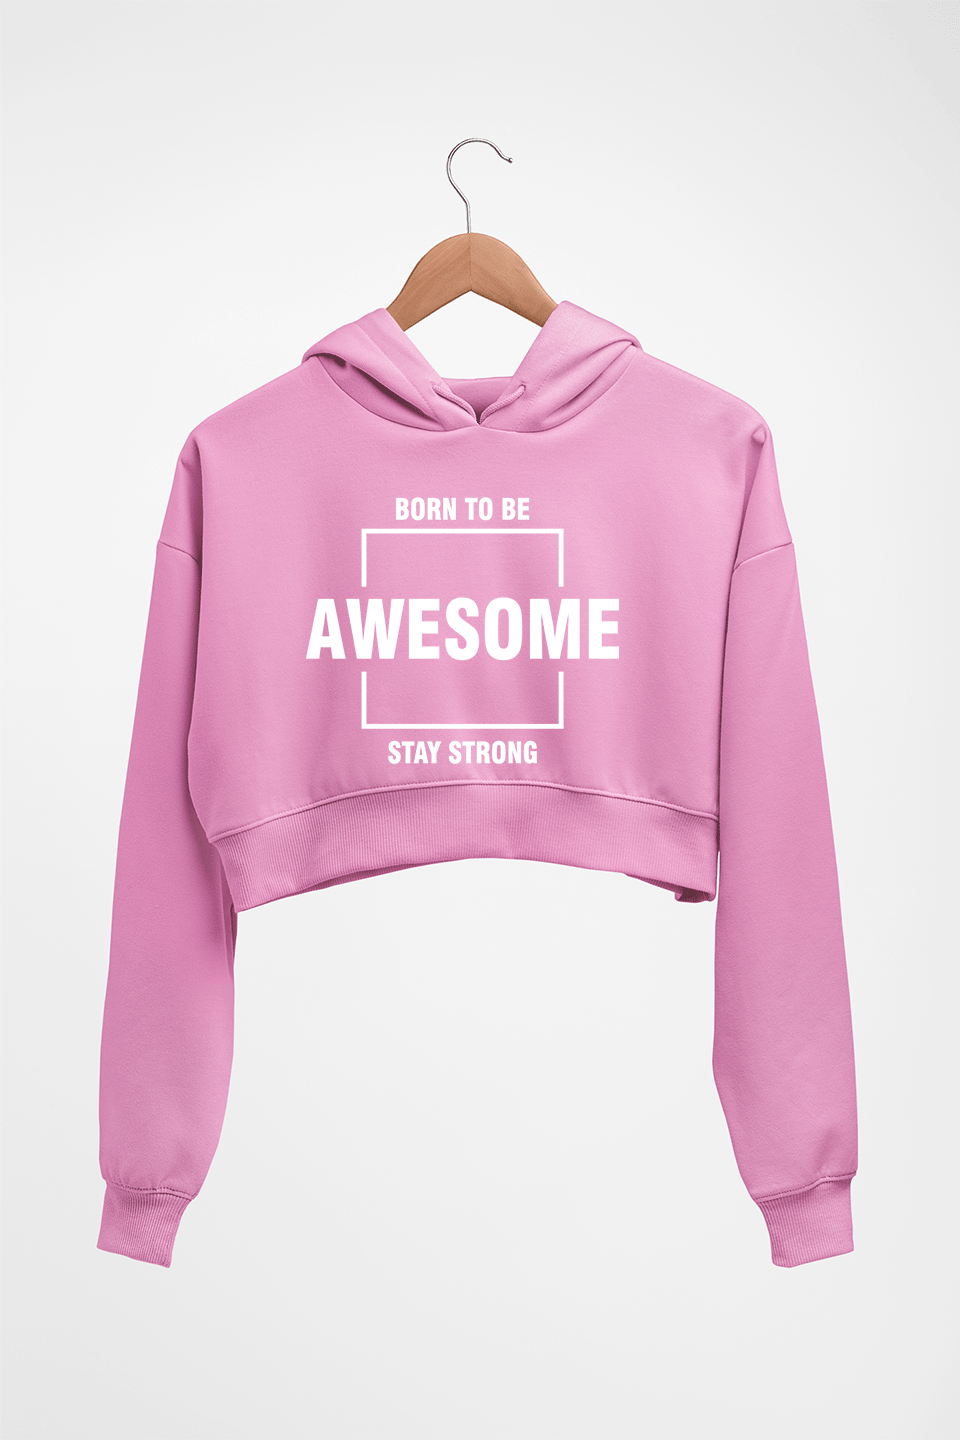 Born to be awsome Stay Strong Crop HOODIE FOR WOMEN